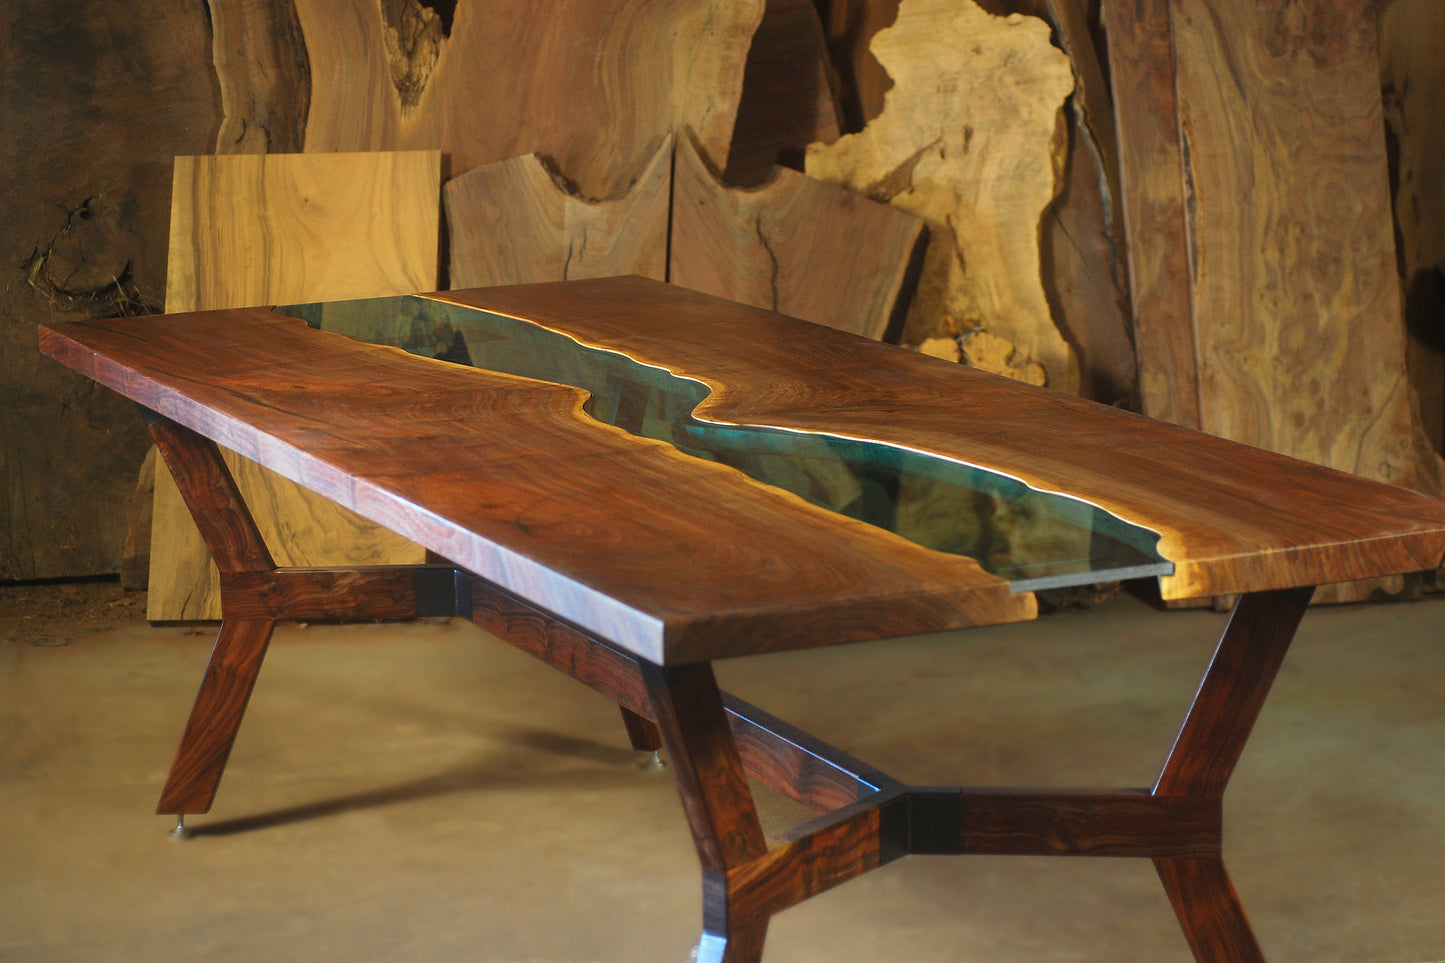 Glass river table